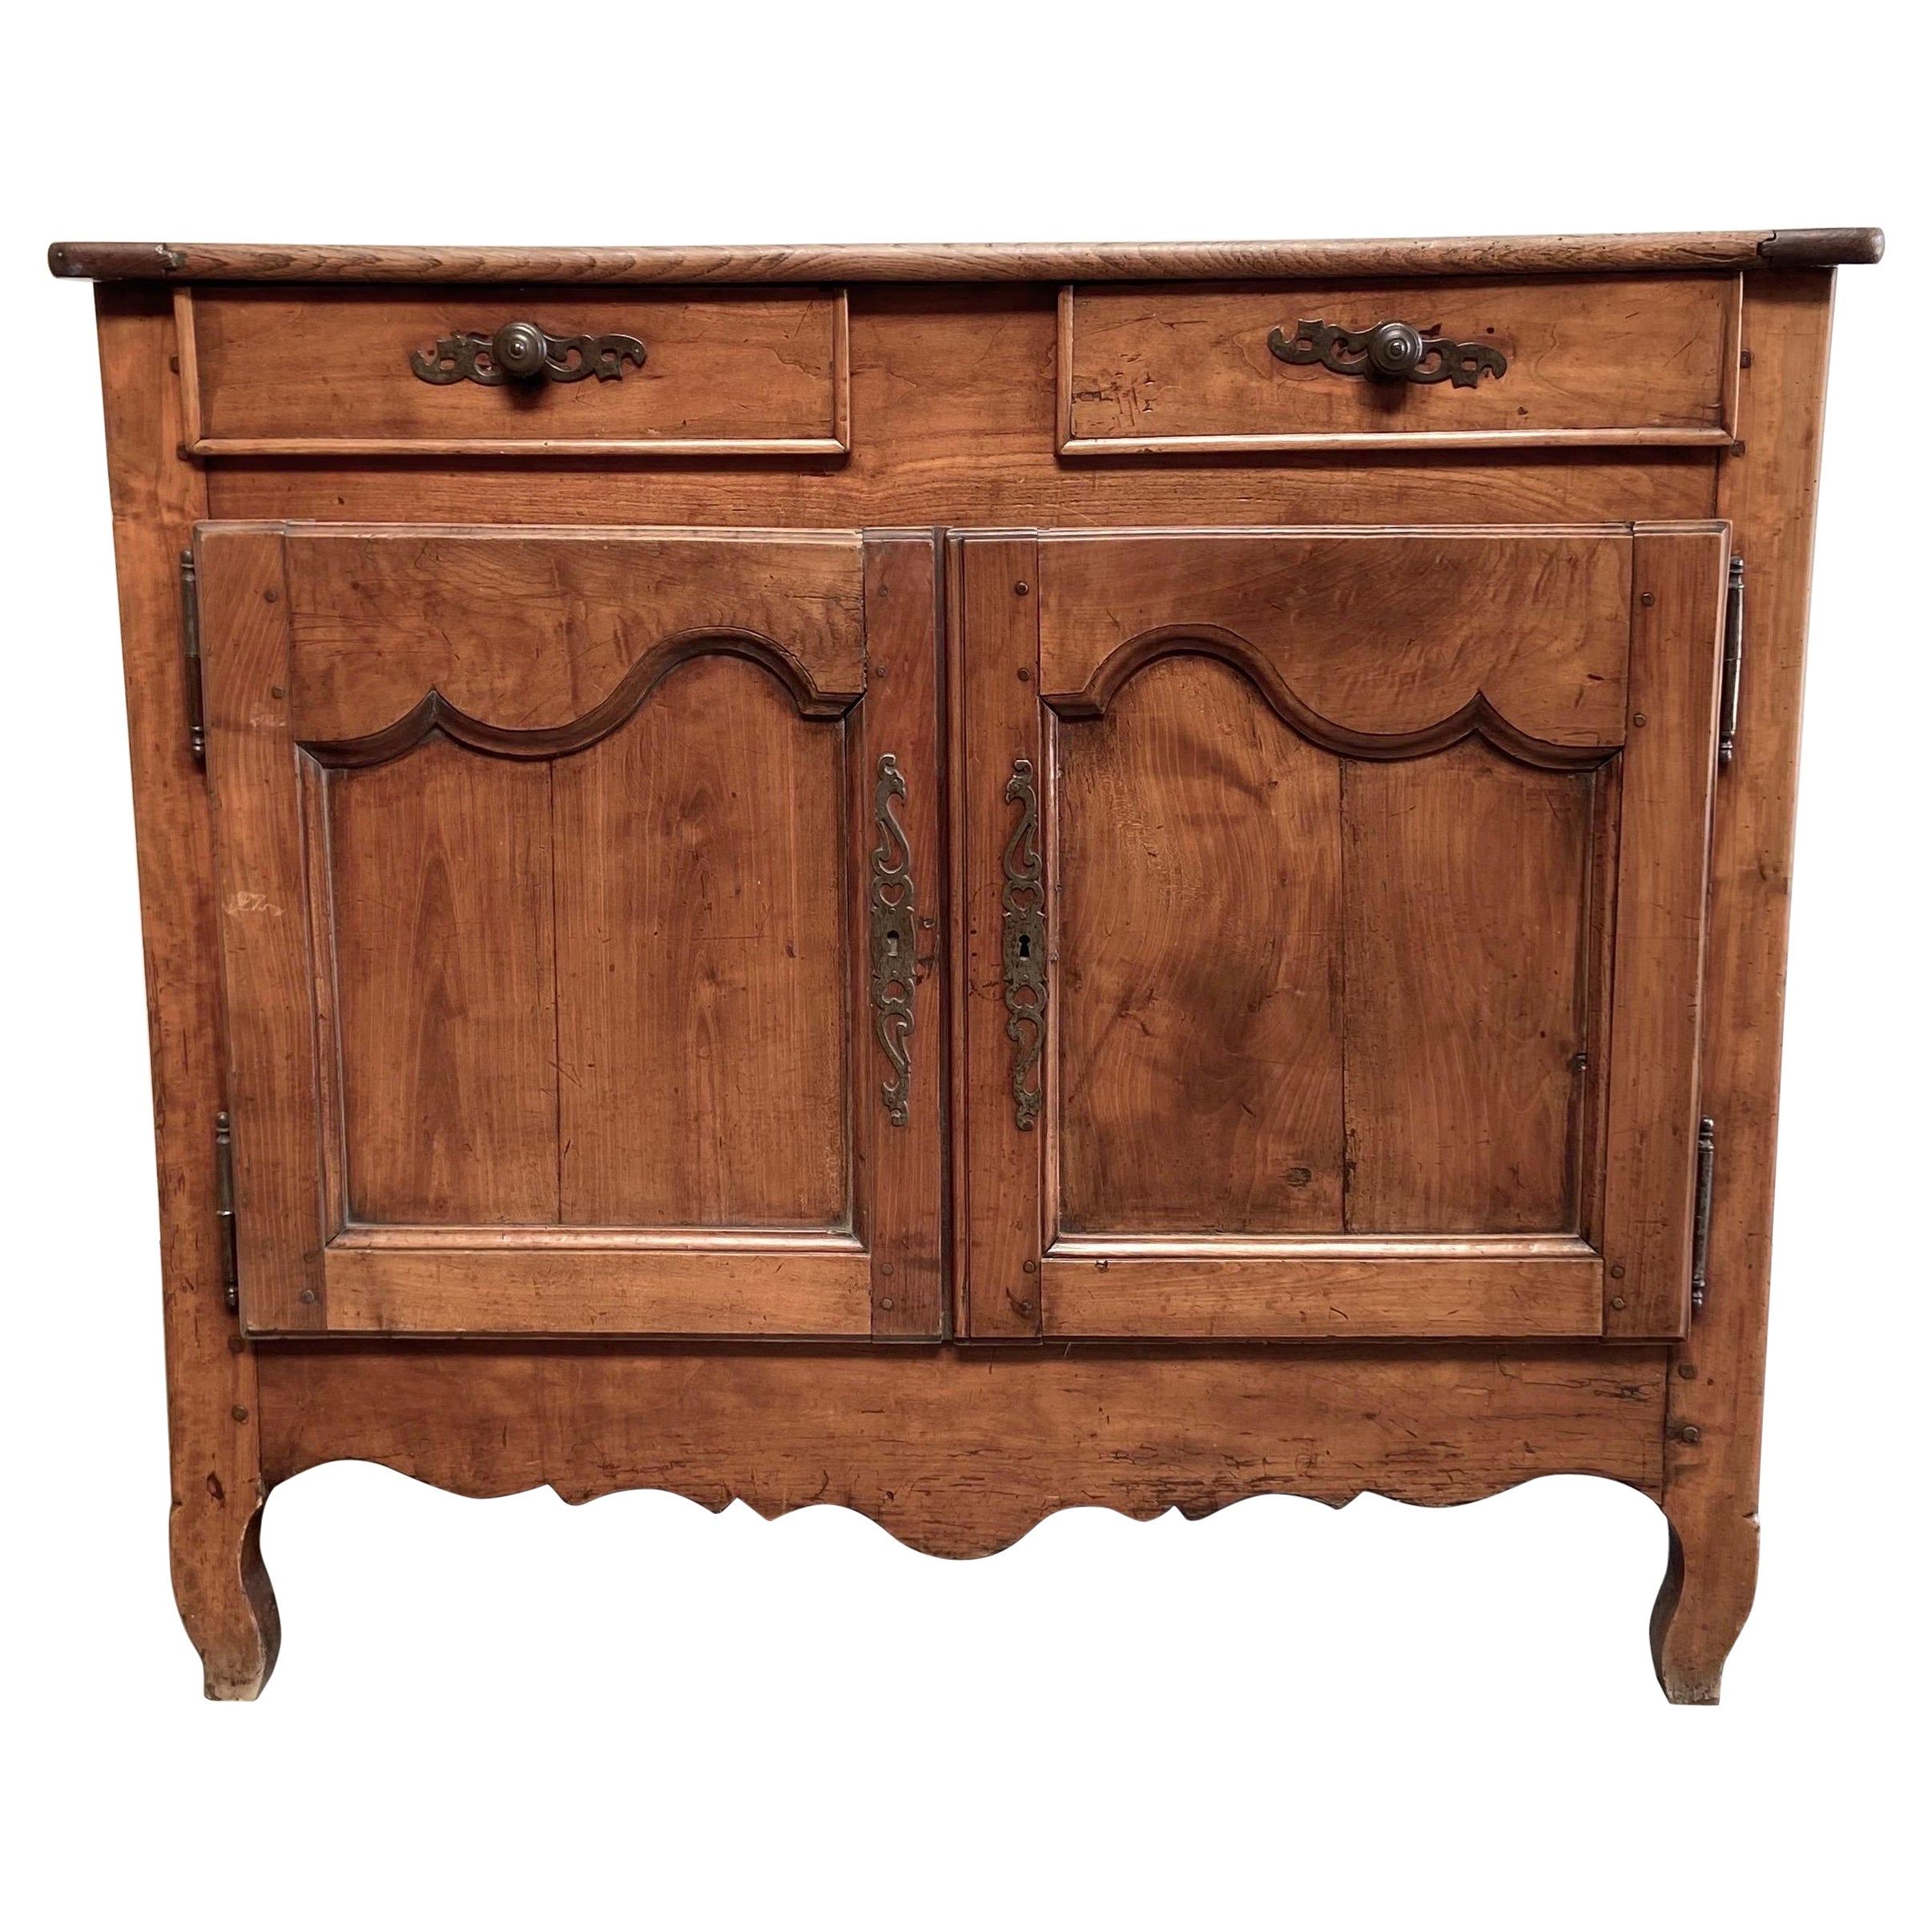 French Early 19th Century Transition Style Walnut Buffet with Doors and Drawers For Sale